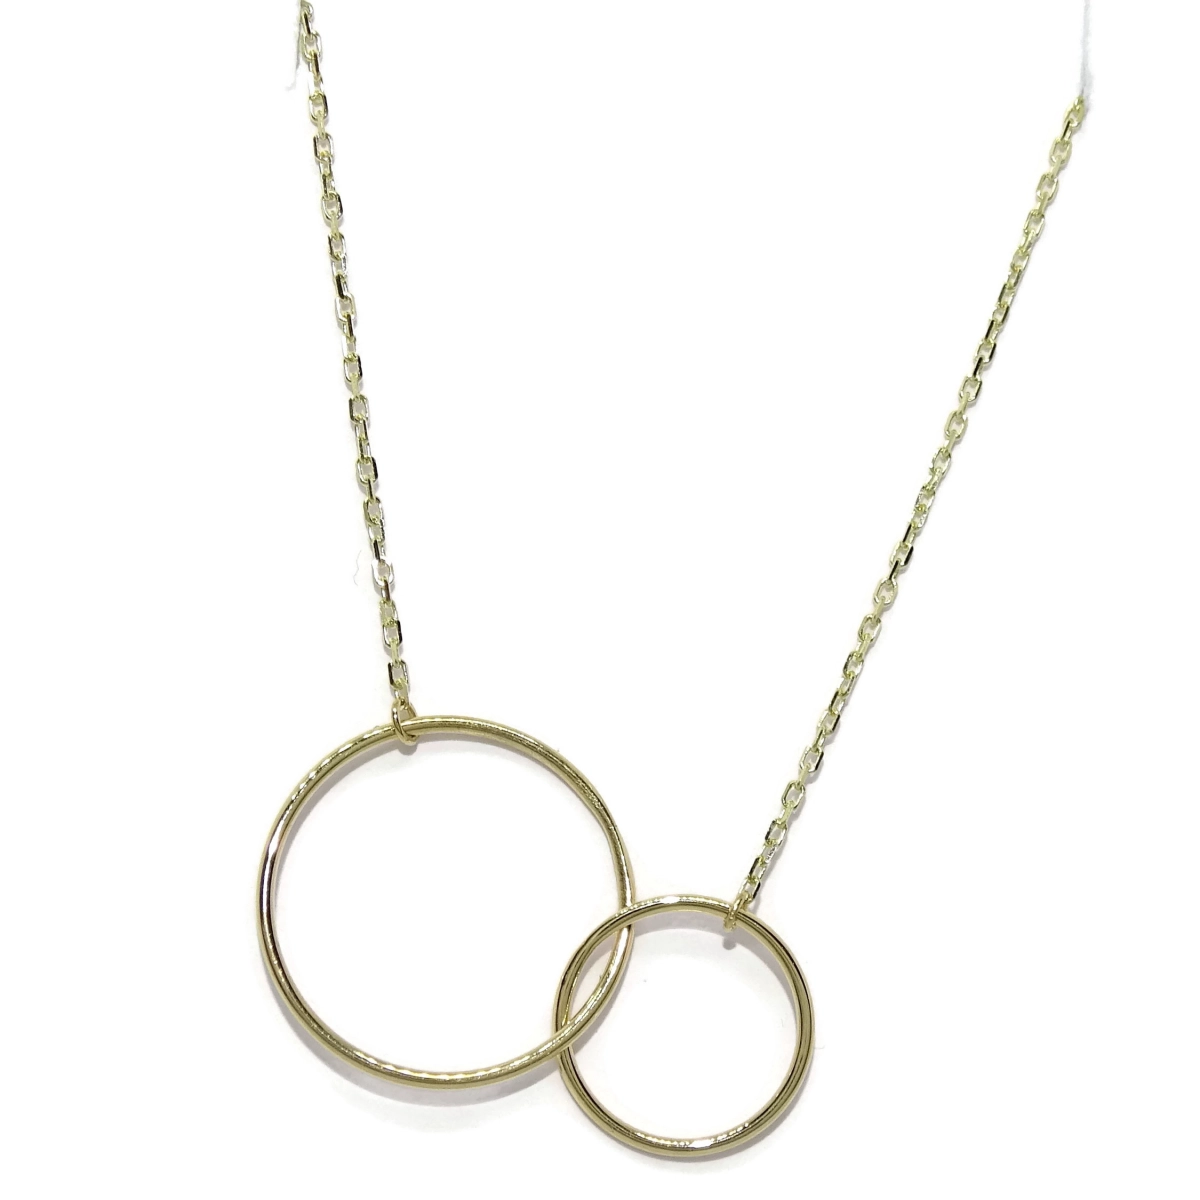 NECKLACE OF 18K YELLOW GOLD WITH 2 C�CIRCLES ALWAYS UNITED IN A CL�SICO REINVENTED. NEVER SAY NEVER